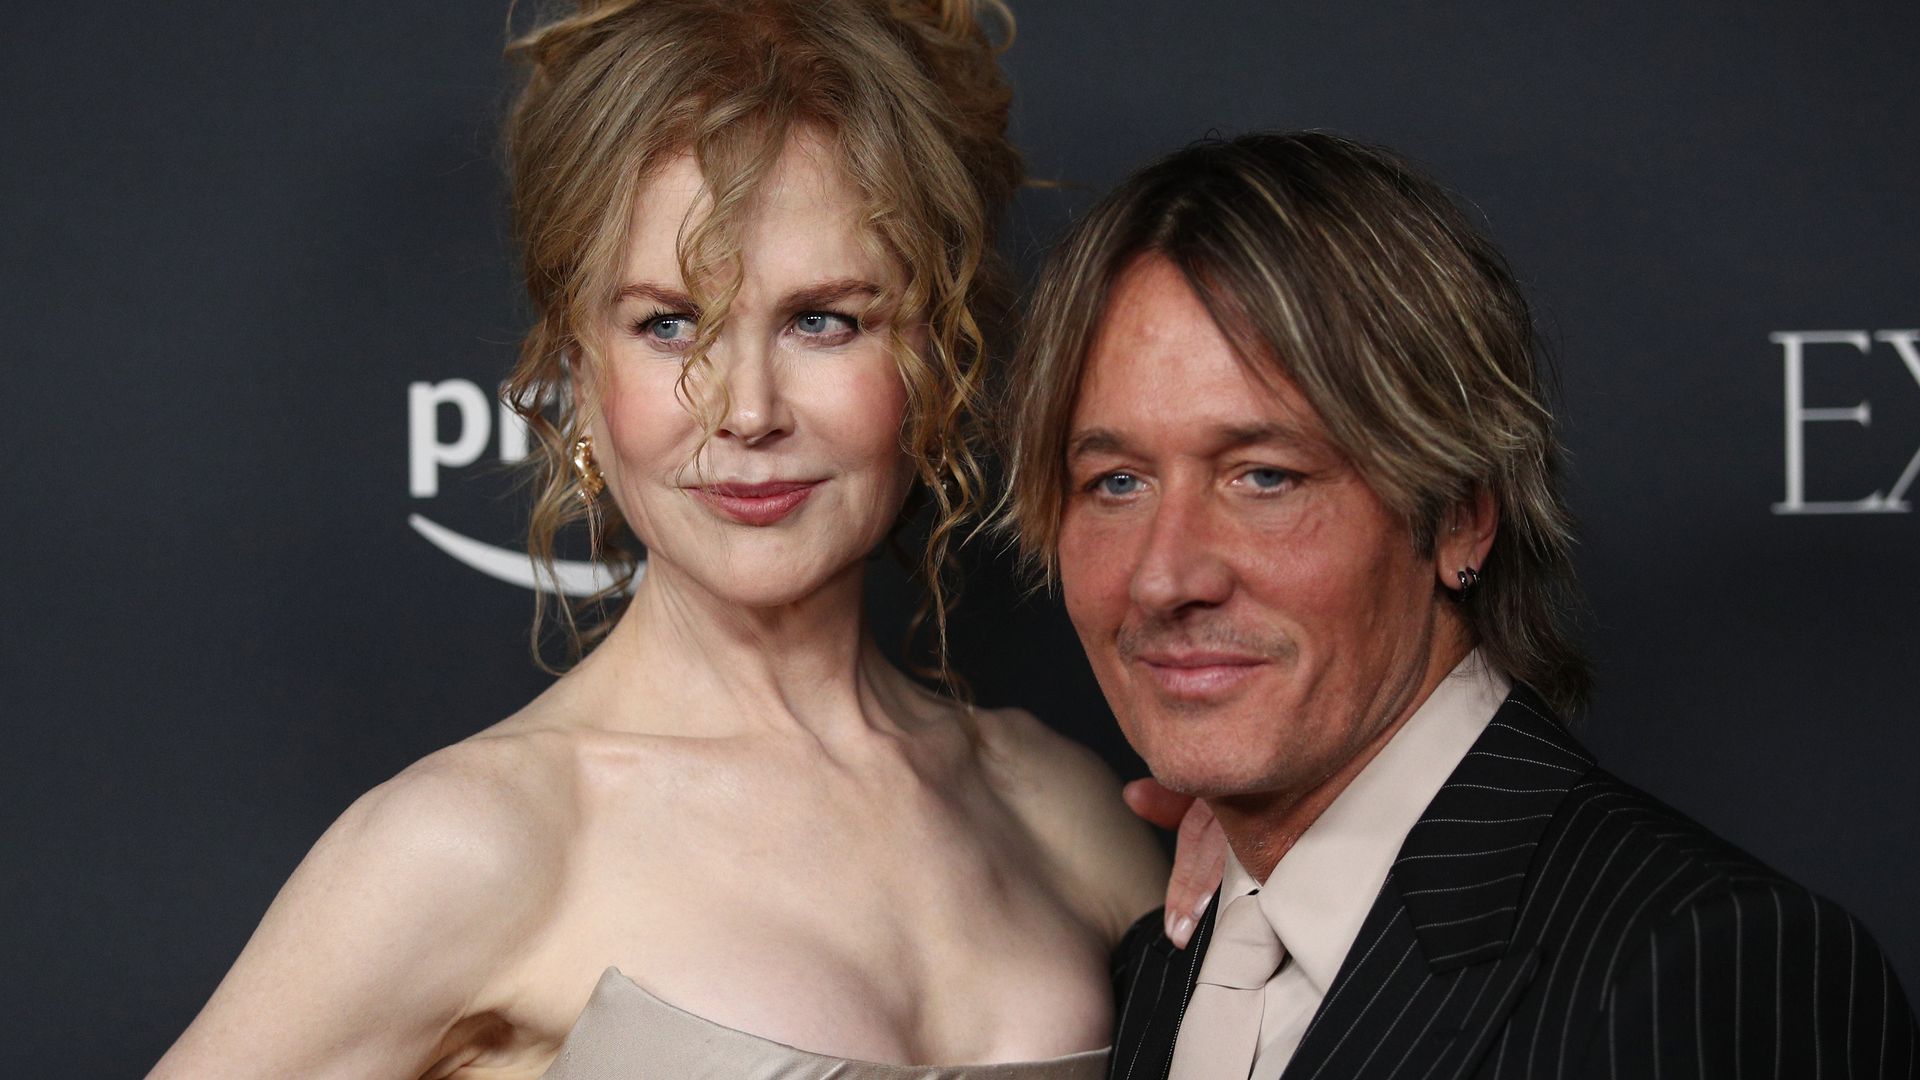 Keith Urban and Nicole Kidman attend a special screening of "Expats" at Palace Verona on December 20, 2023 in Sydney, New South Wales